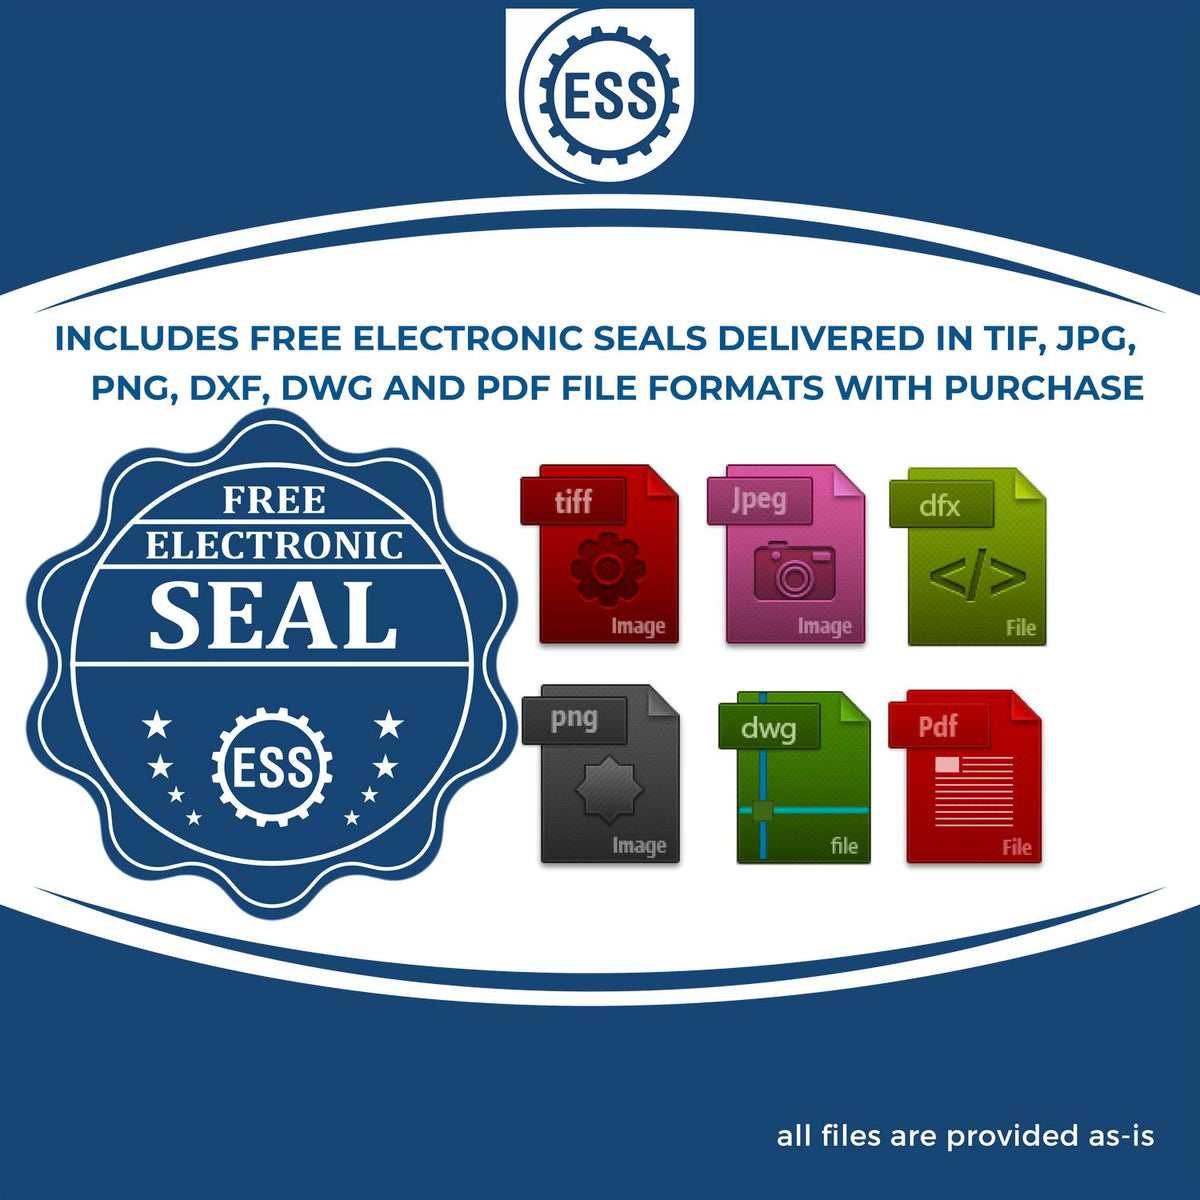 An infographic for the free electronic seal for the Slim Pre-Inked District of Columbia Professional Geologist Seal Stamp illustrating the different file type icons such as DXF, DWG, TIF, JPG and PNG.